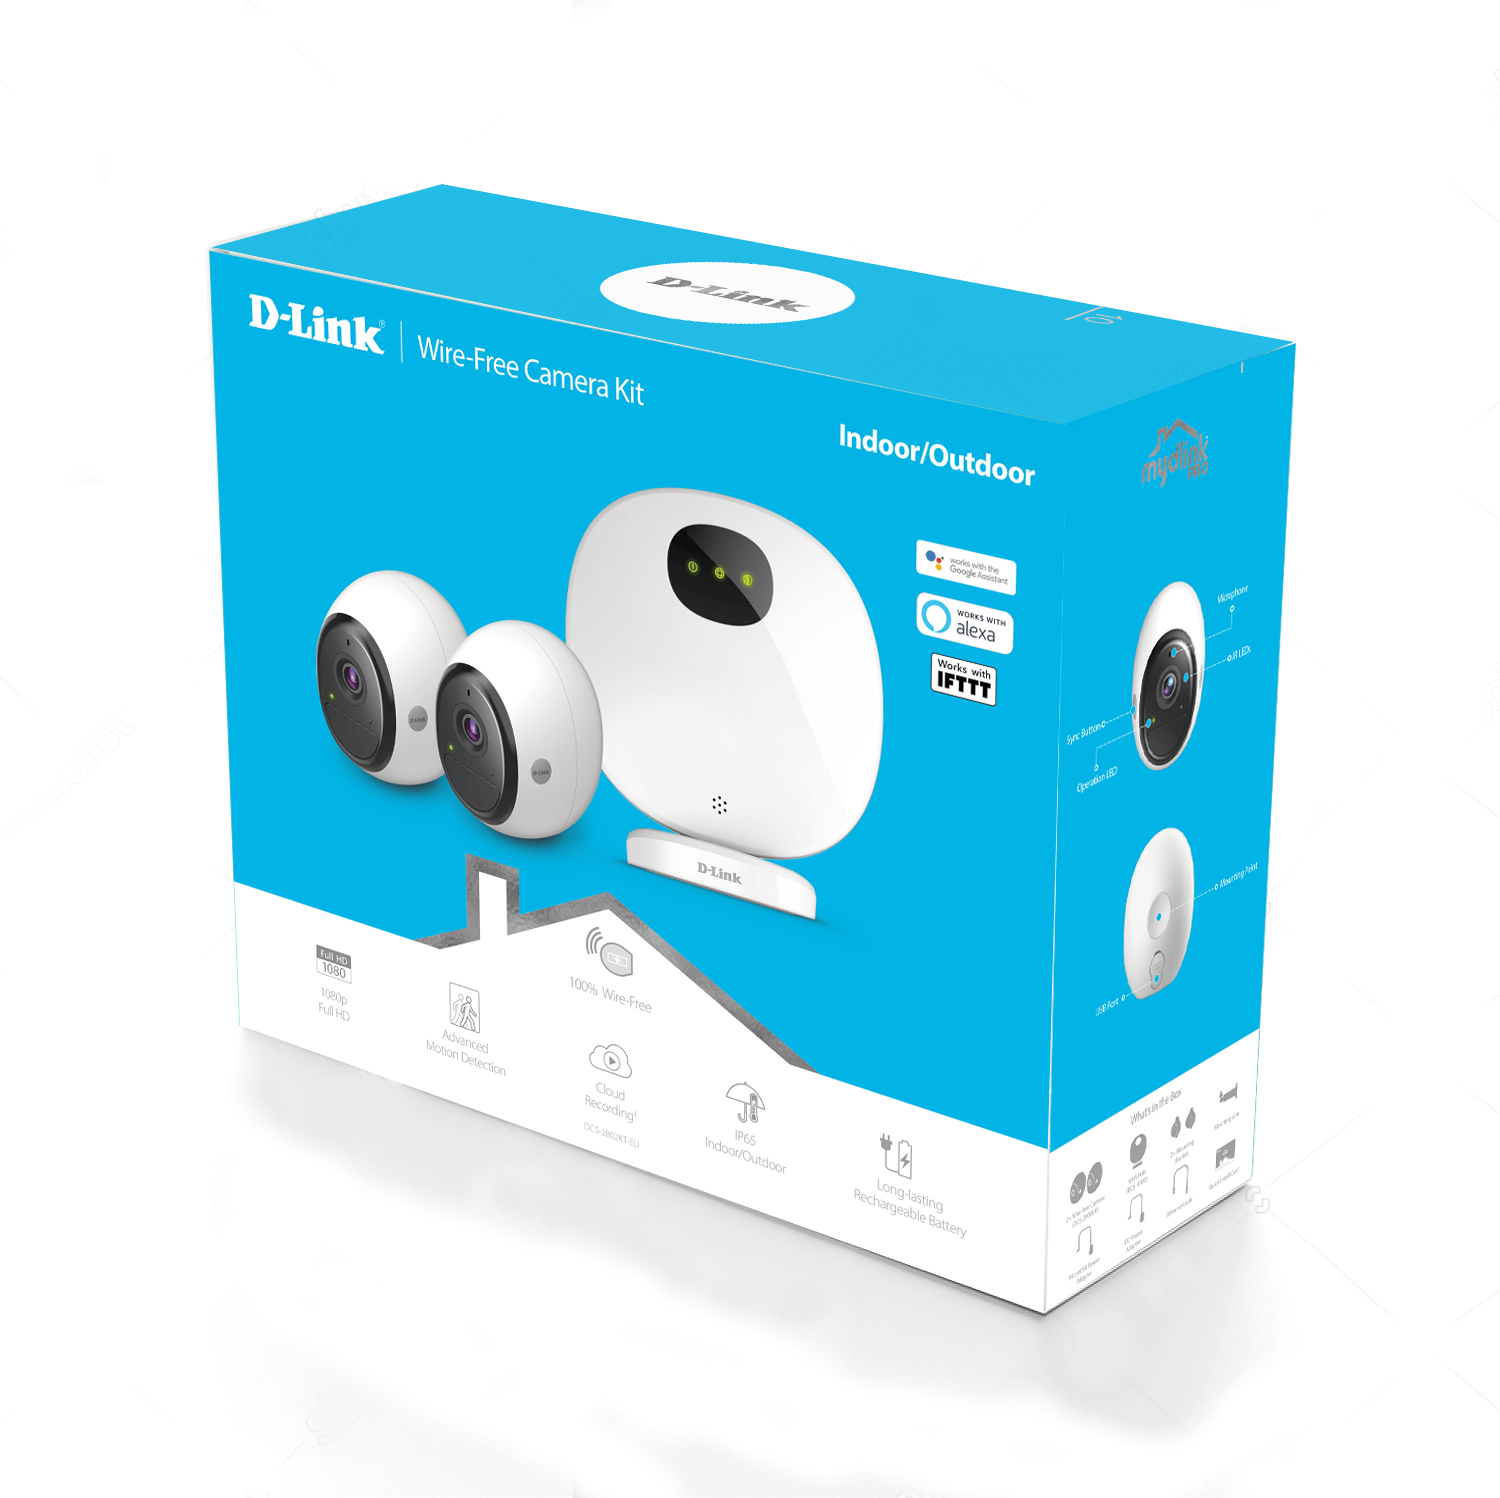 D-Link unveils its first wire-free camera kit for ultra-easy, flexible home surveillance